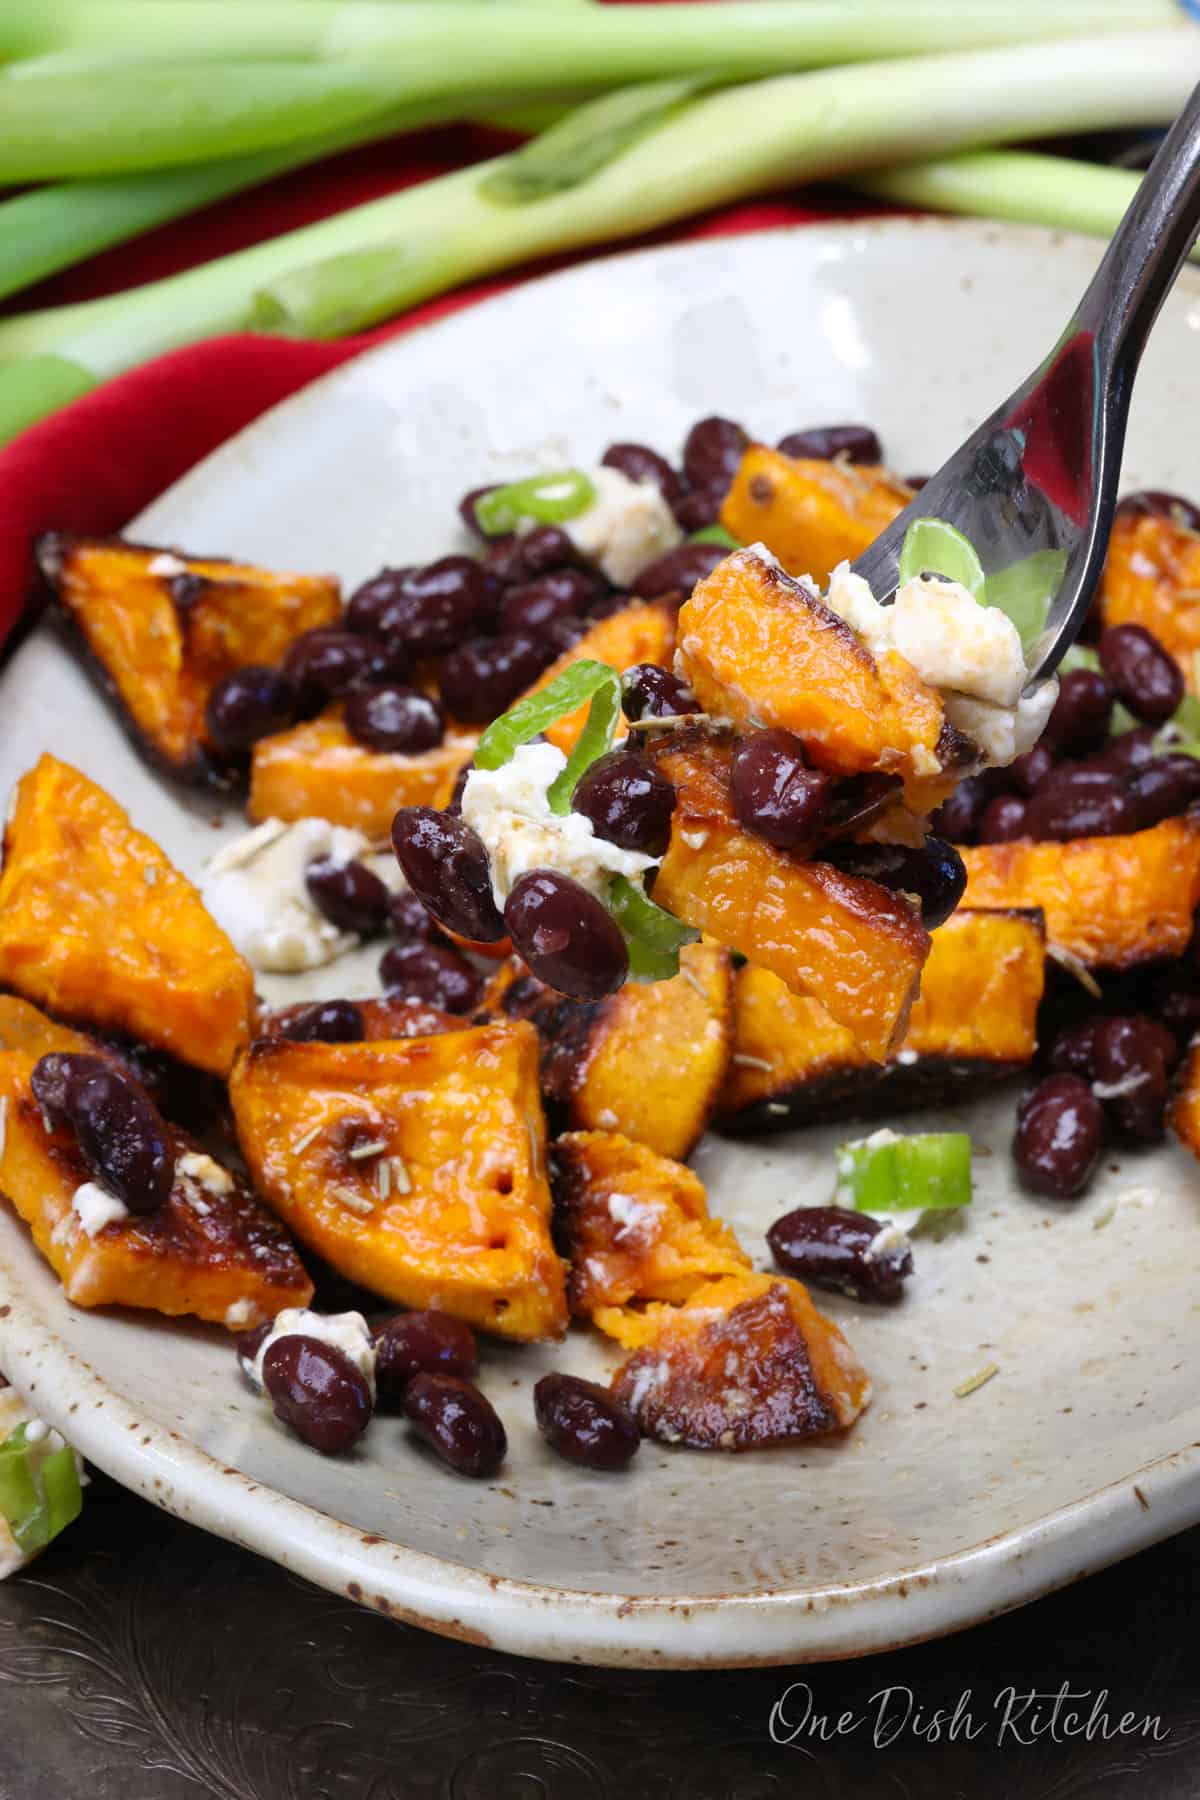 a forked holding roasted sweet potatoes and black beans over a plate of black bean salad.